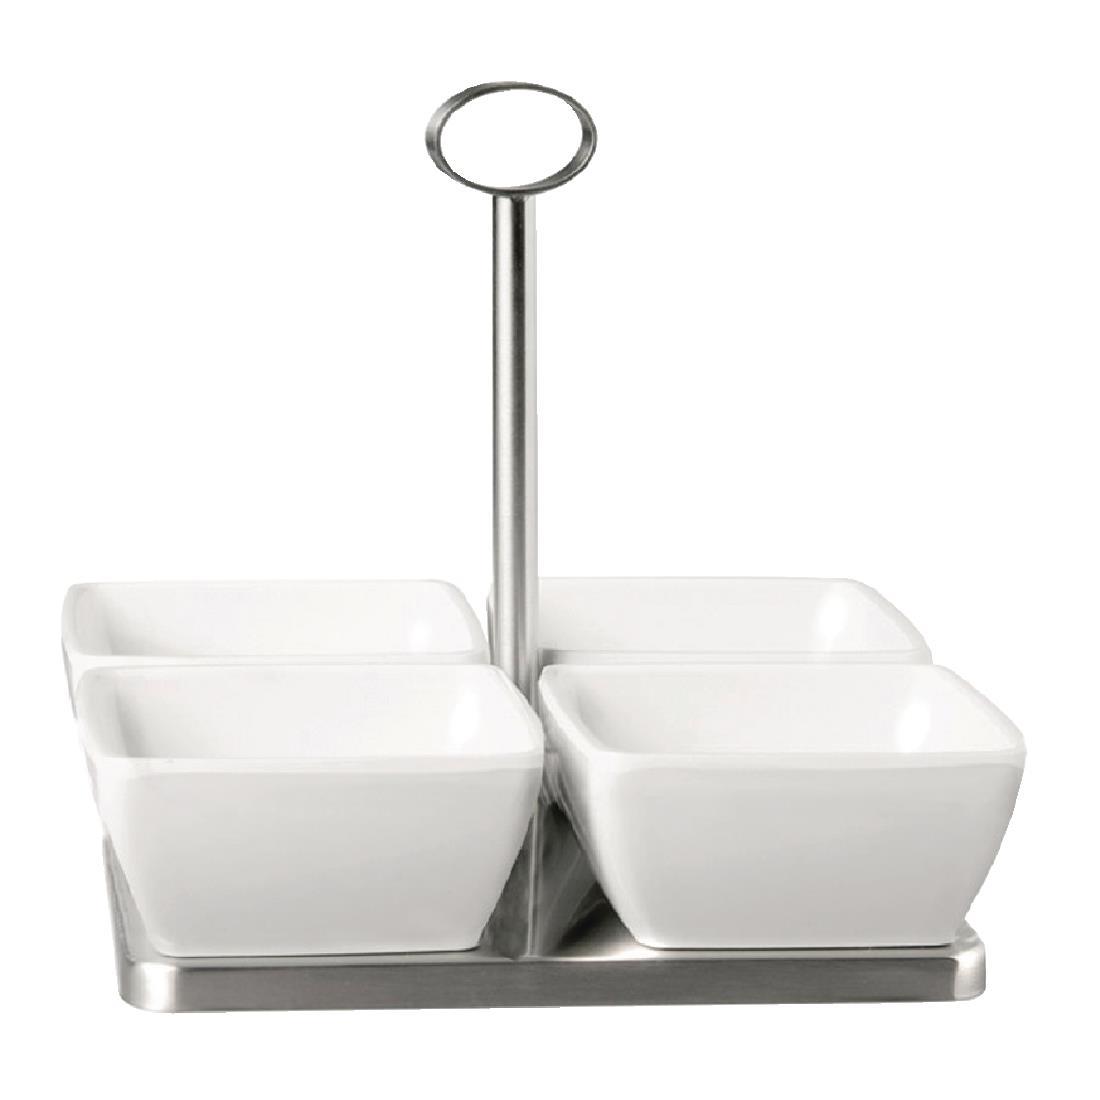 APS Stainless Steel Stand with 4x Bowls - GF164  - 1